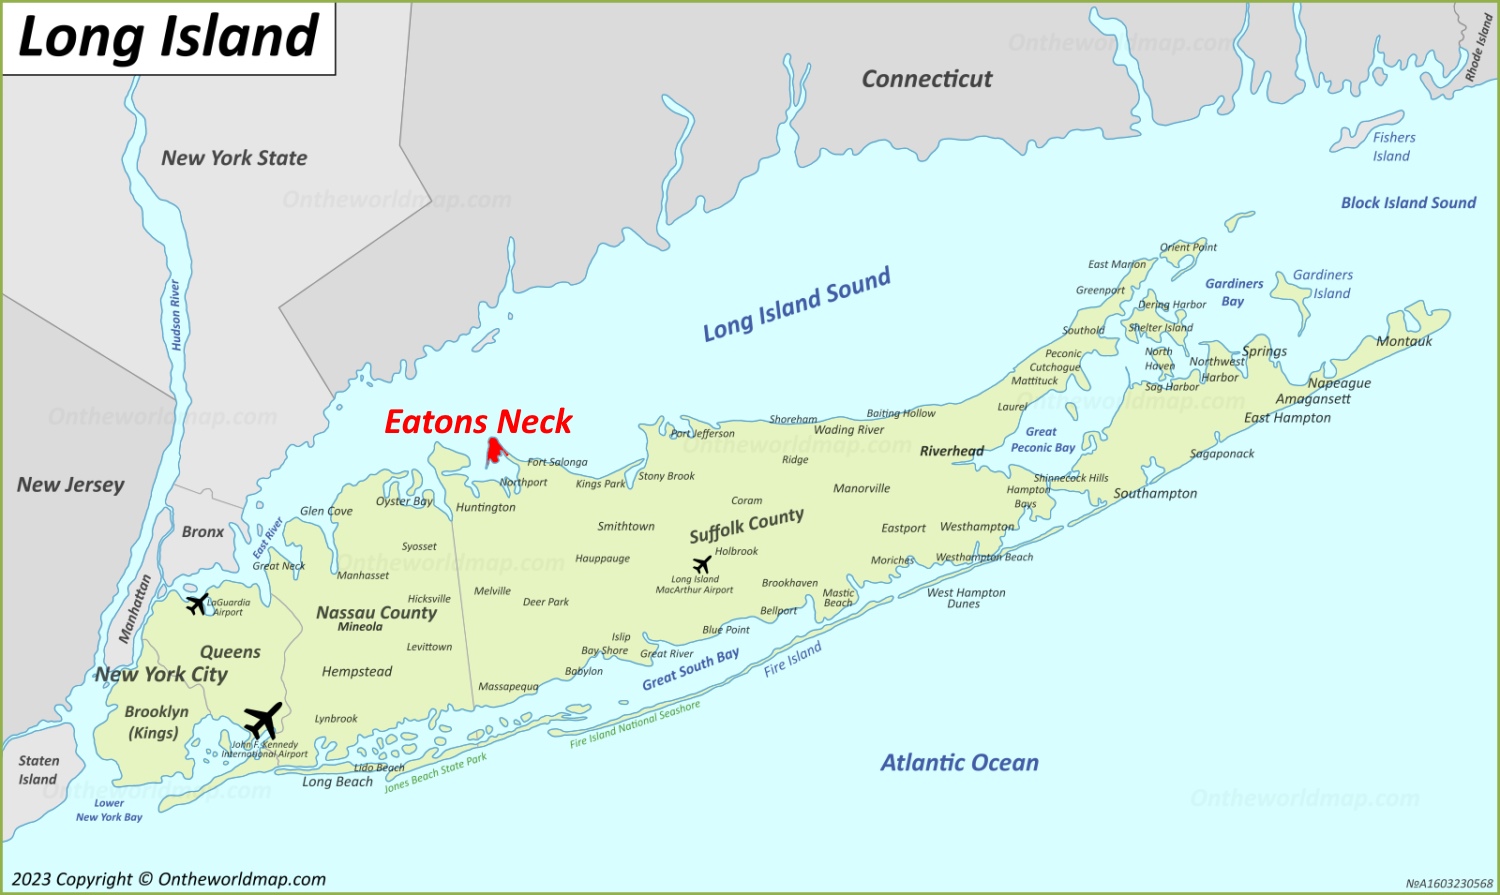 Eatons Neck Location On The Long Island Map